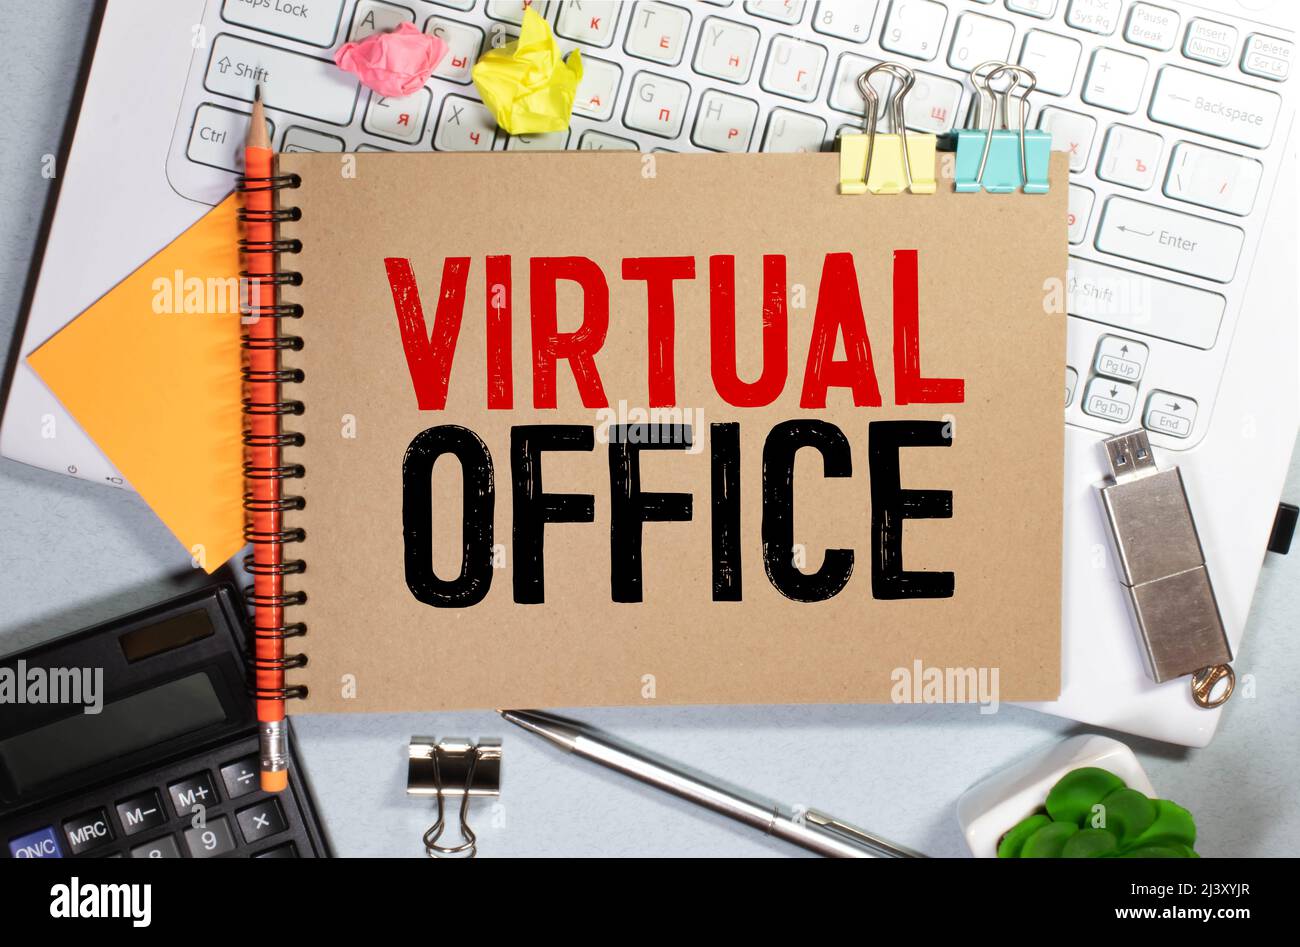 VIRTUAL OFFICE. text on white paper on gray background. Stock Photo